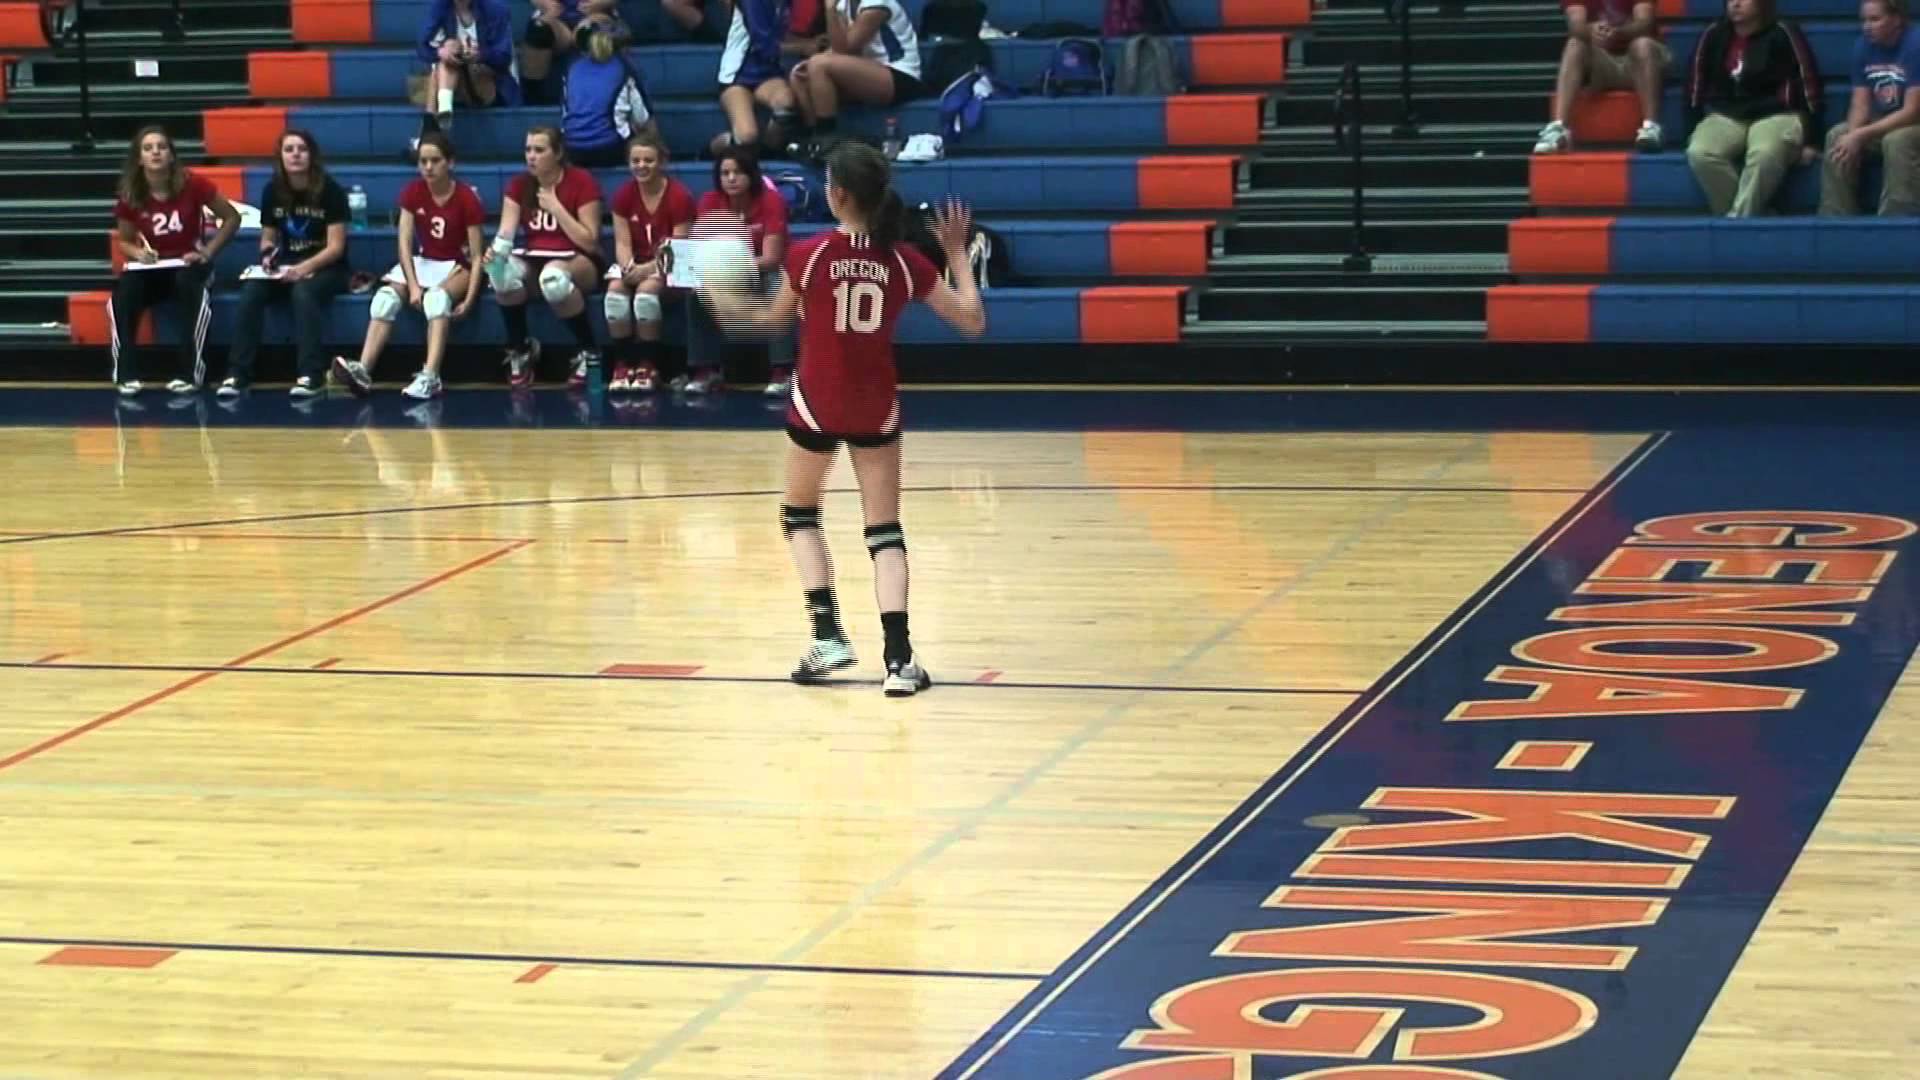 Complete Game: High School Volleyball Match Against Oregon - YouTube